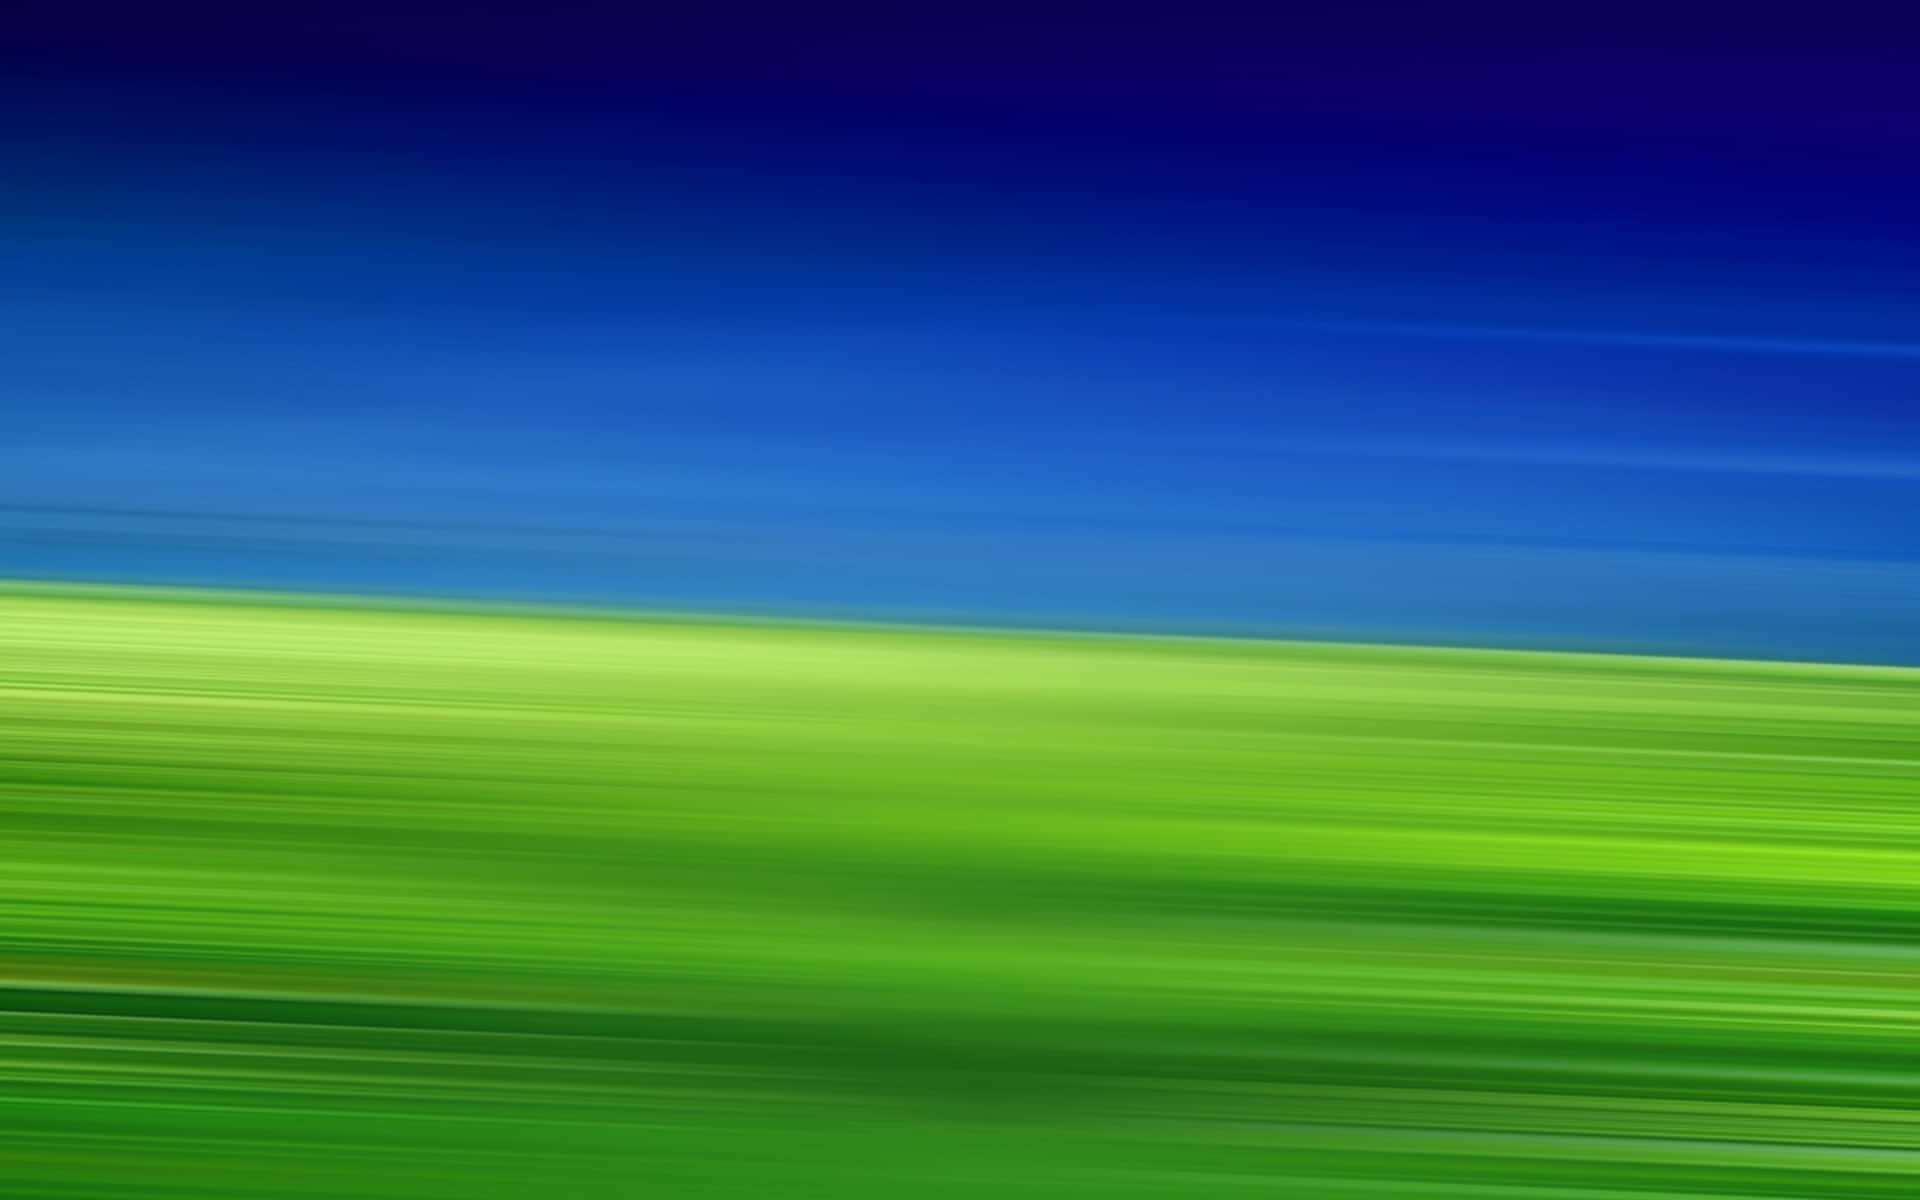 A Green And Blue Blurred Background With A Blurred Background